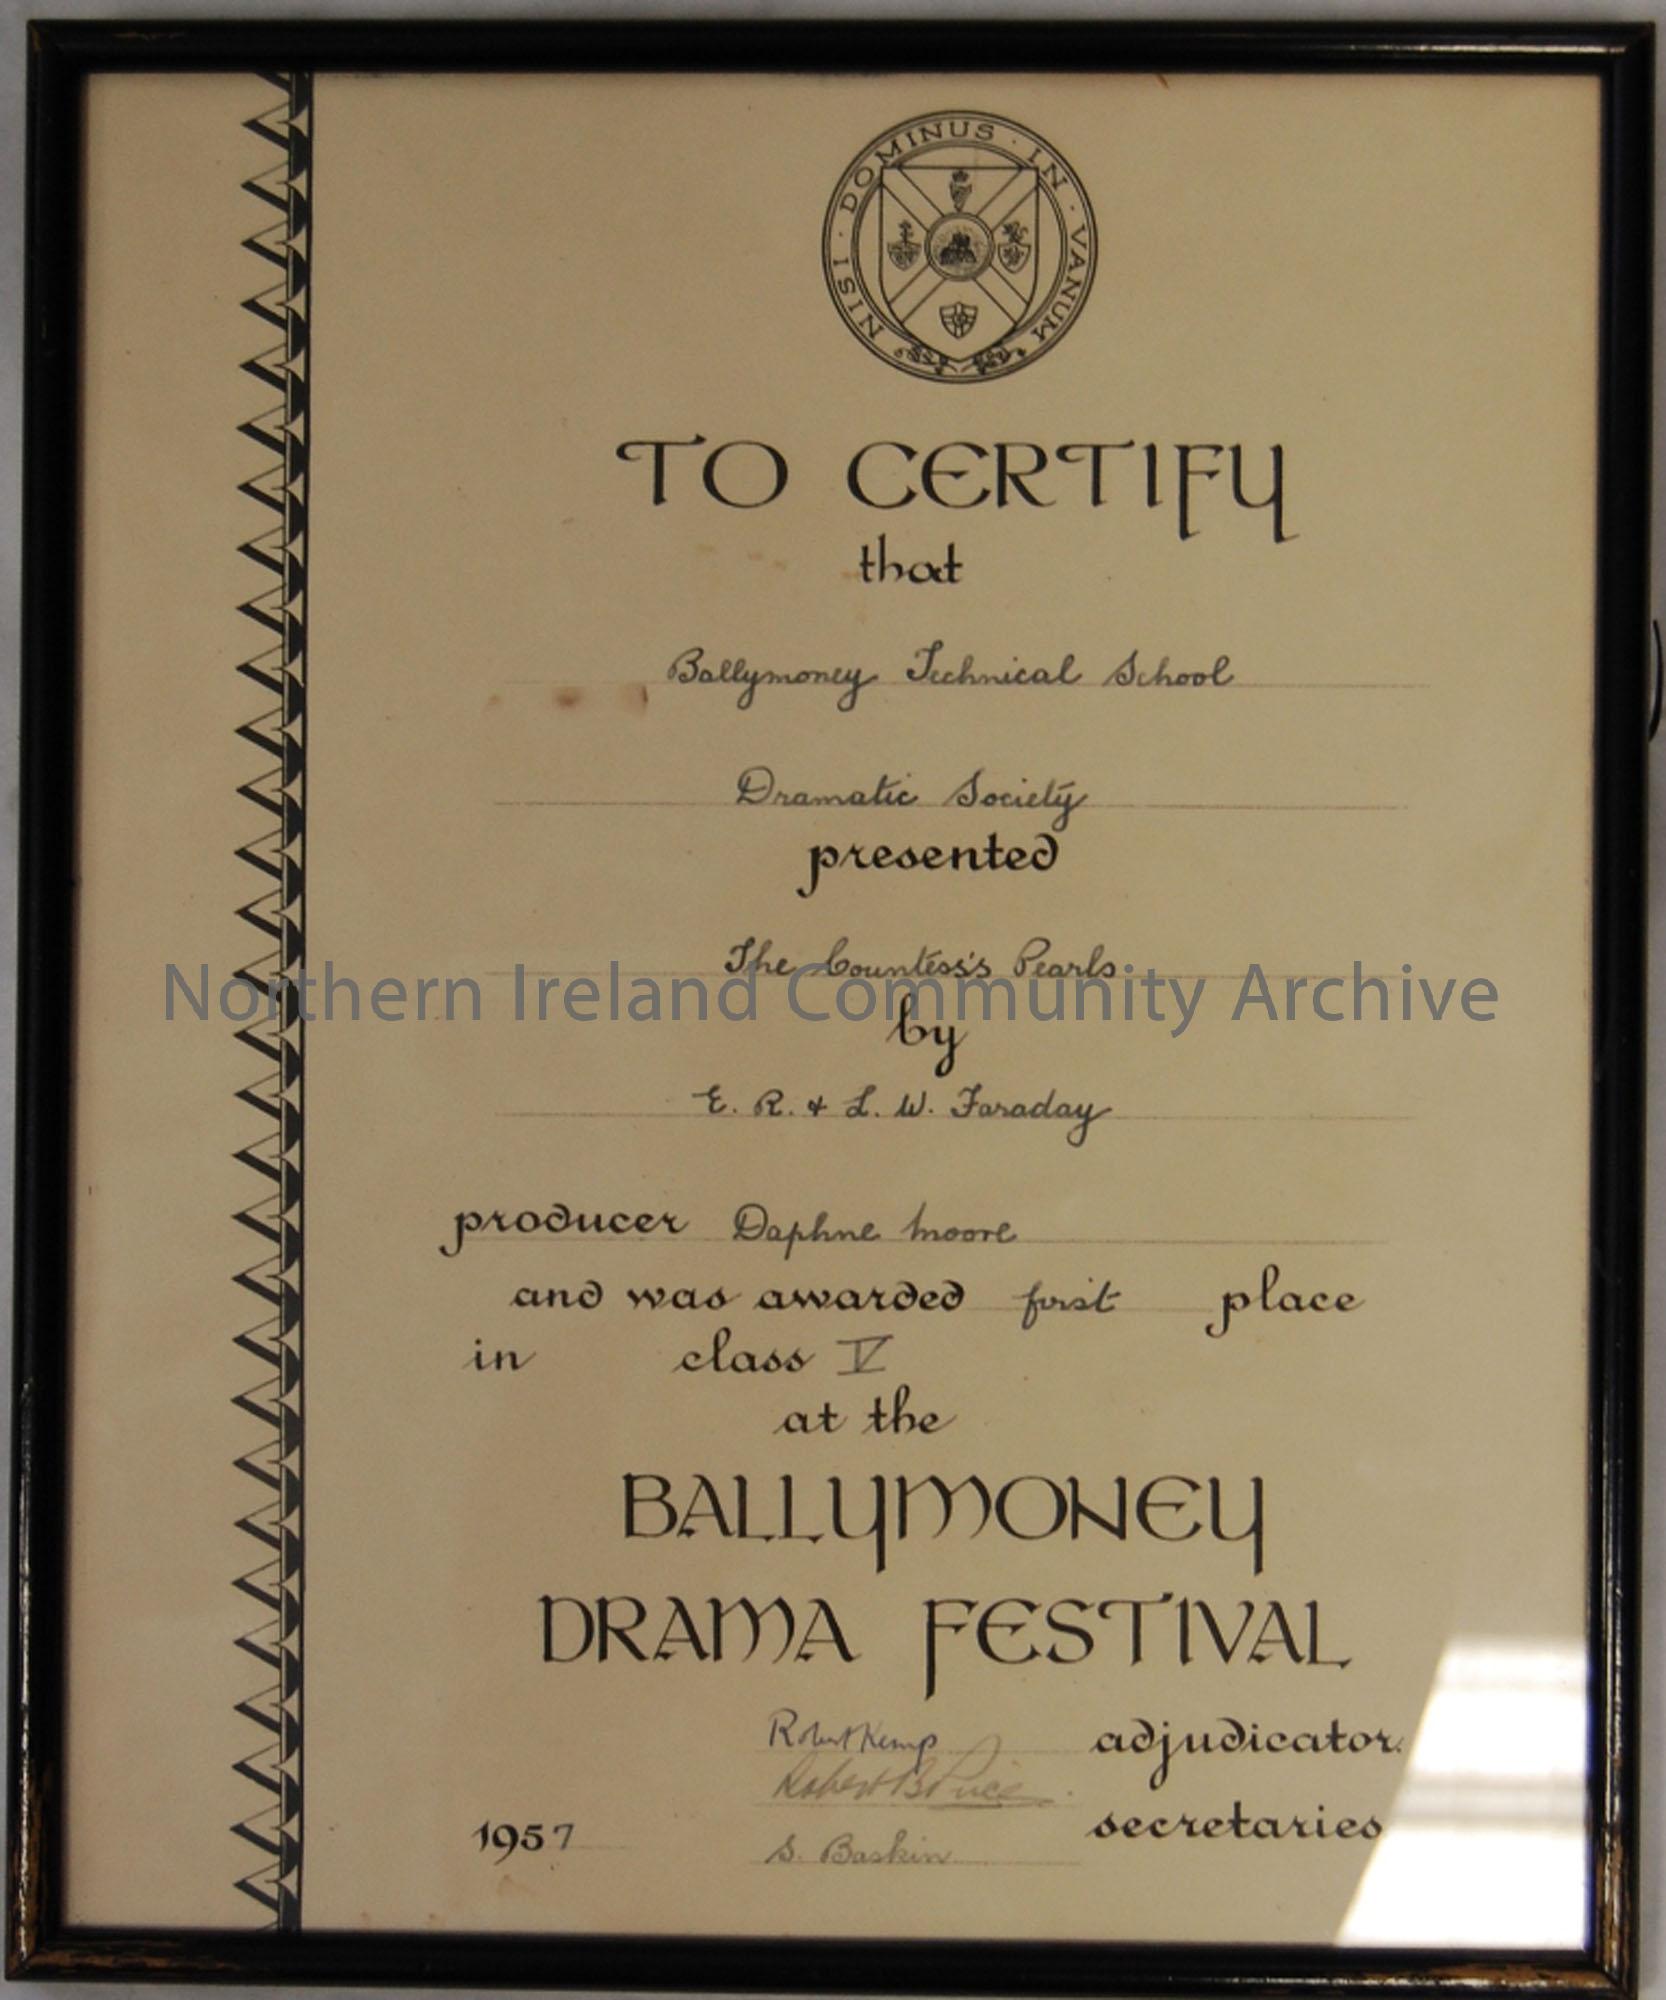 Ballymoney Drama Festival certificate. ‘This is to certify that Ballymoney Technical school Dramatic Society presented ‘the Countess’s Pearls’ by E.R …